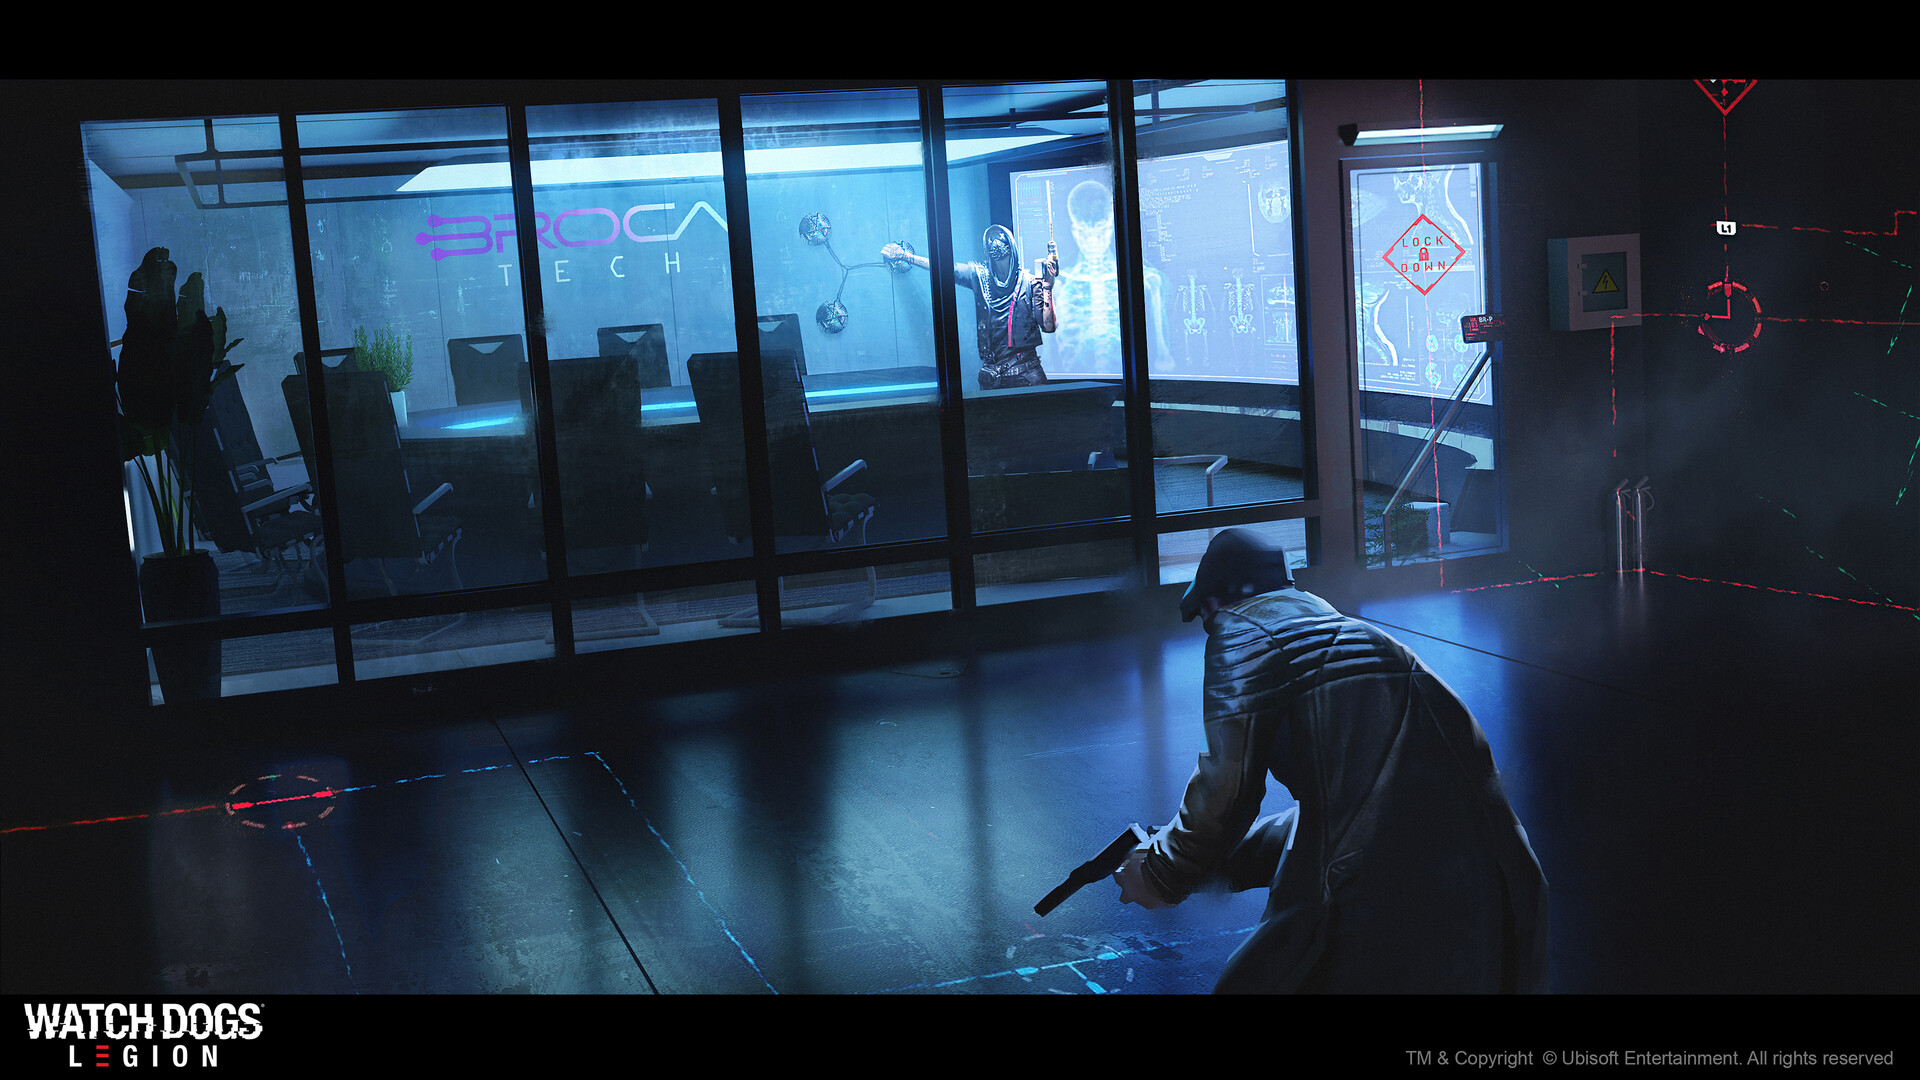 Aiden Pearce and Wrench Return in Watch Dogs®: Legion - Bloodline - Comix  Asylum